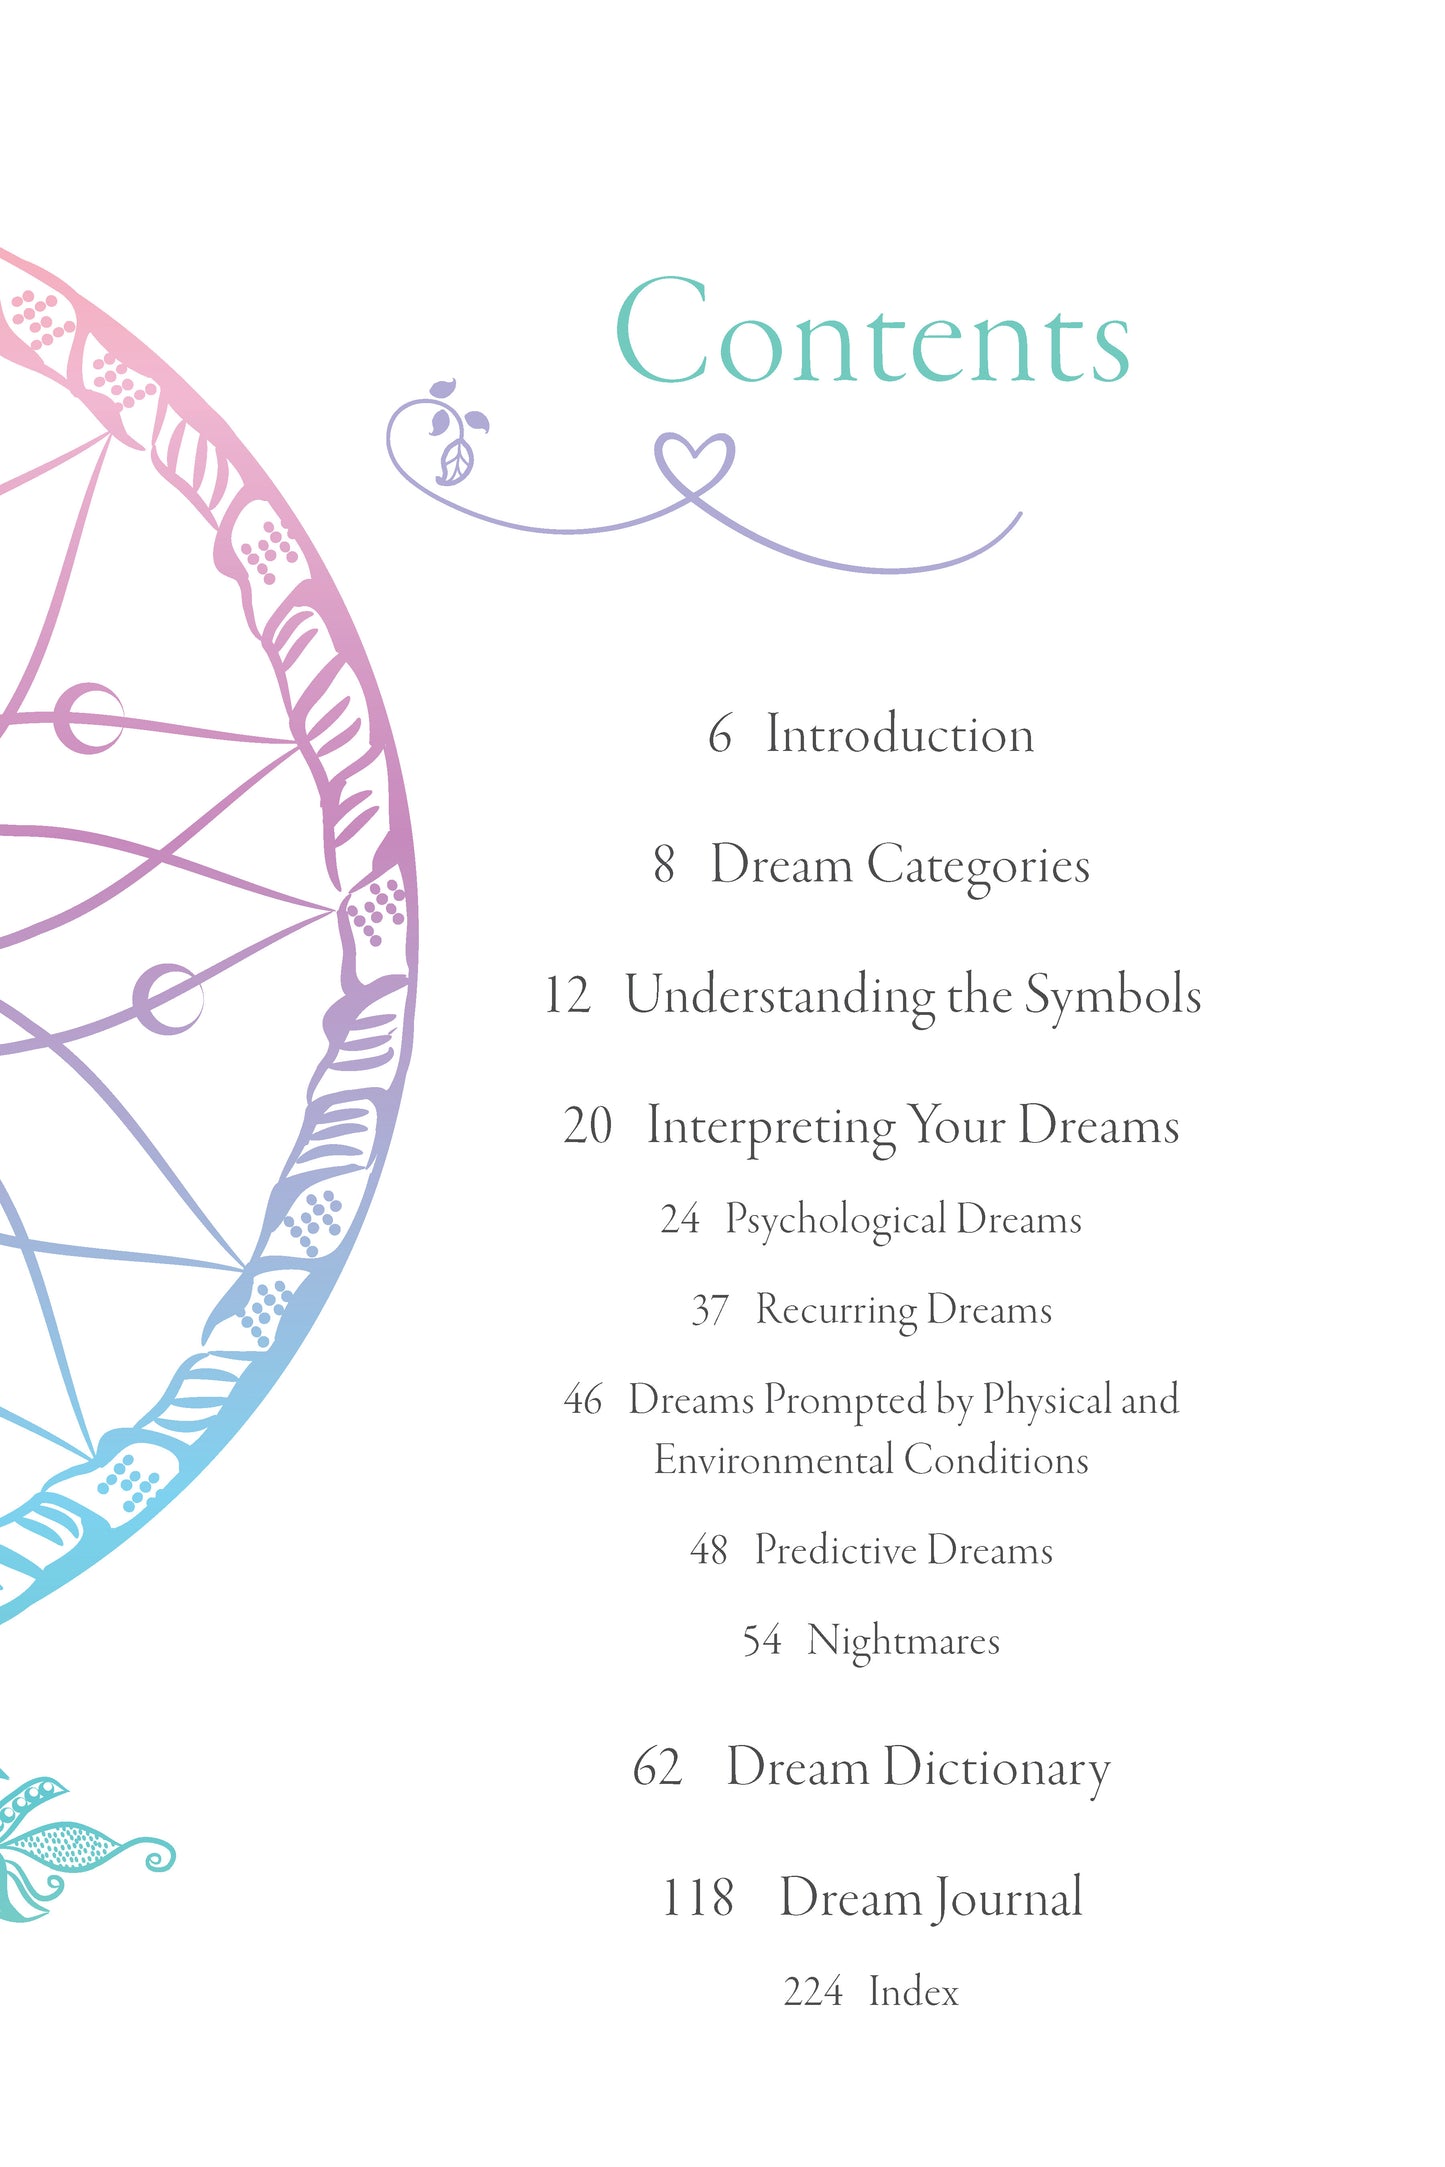 Key to Your Dreams with Dream Journal